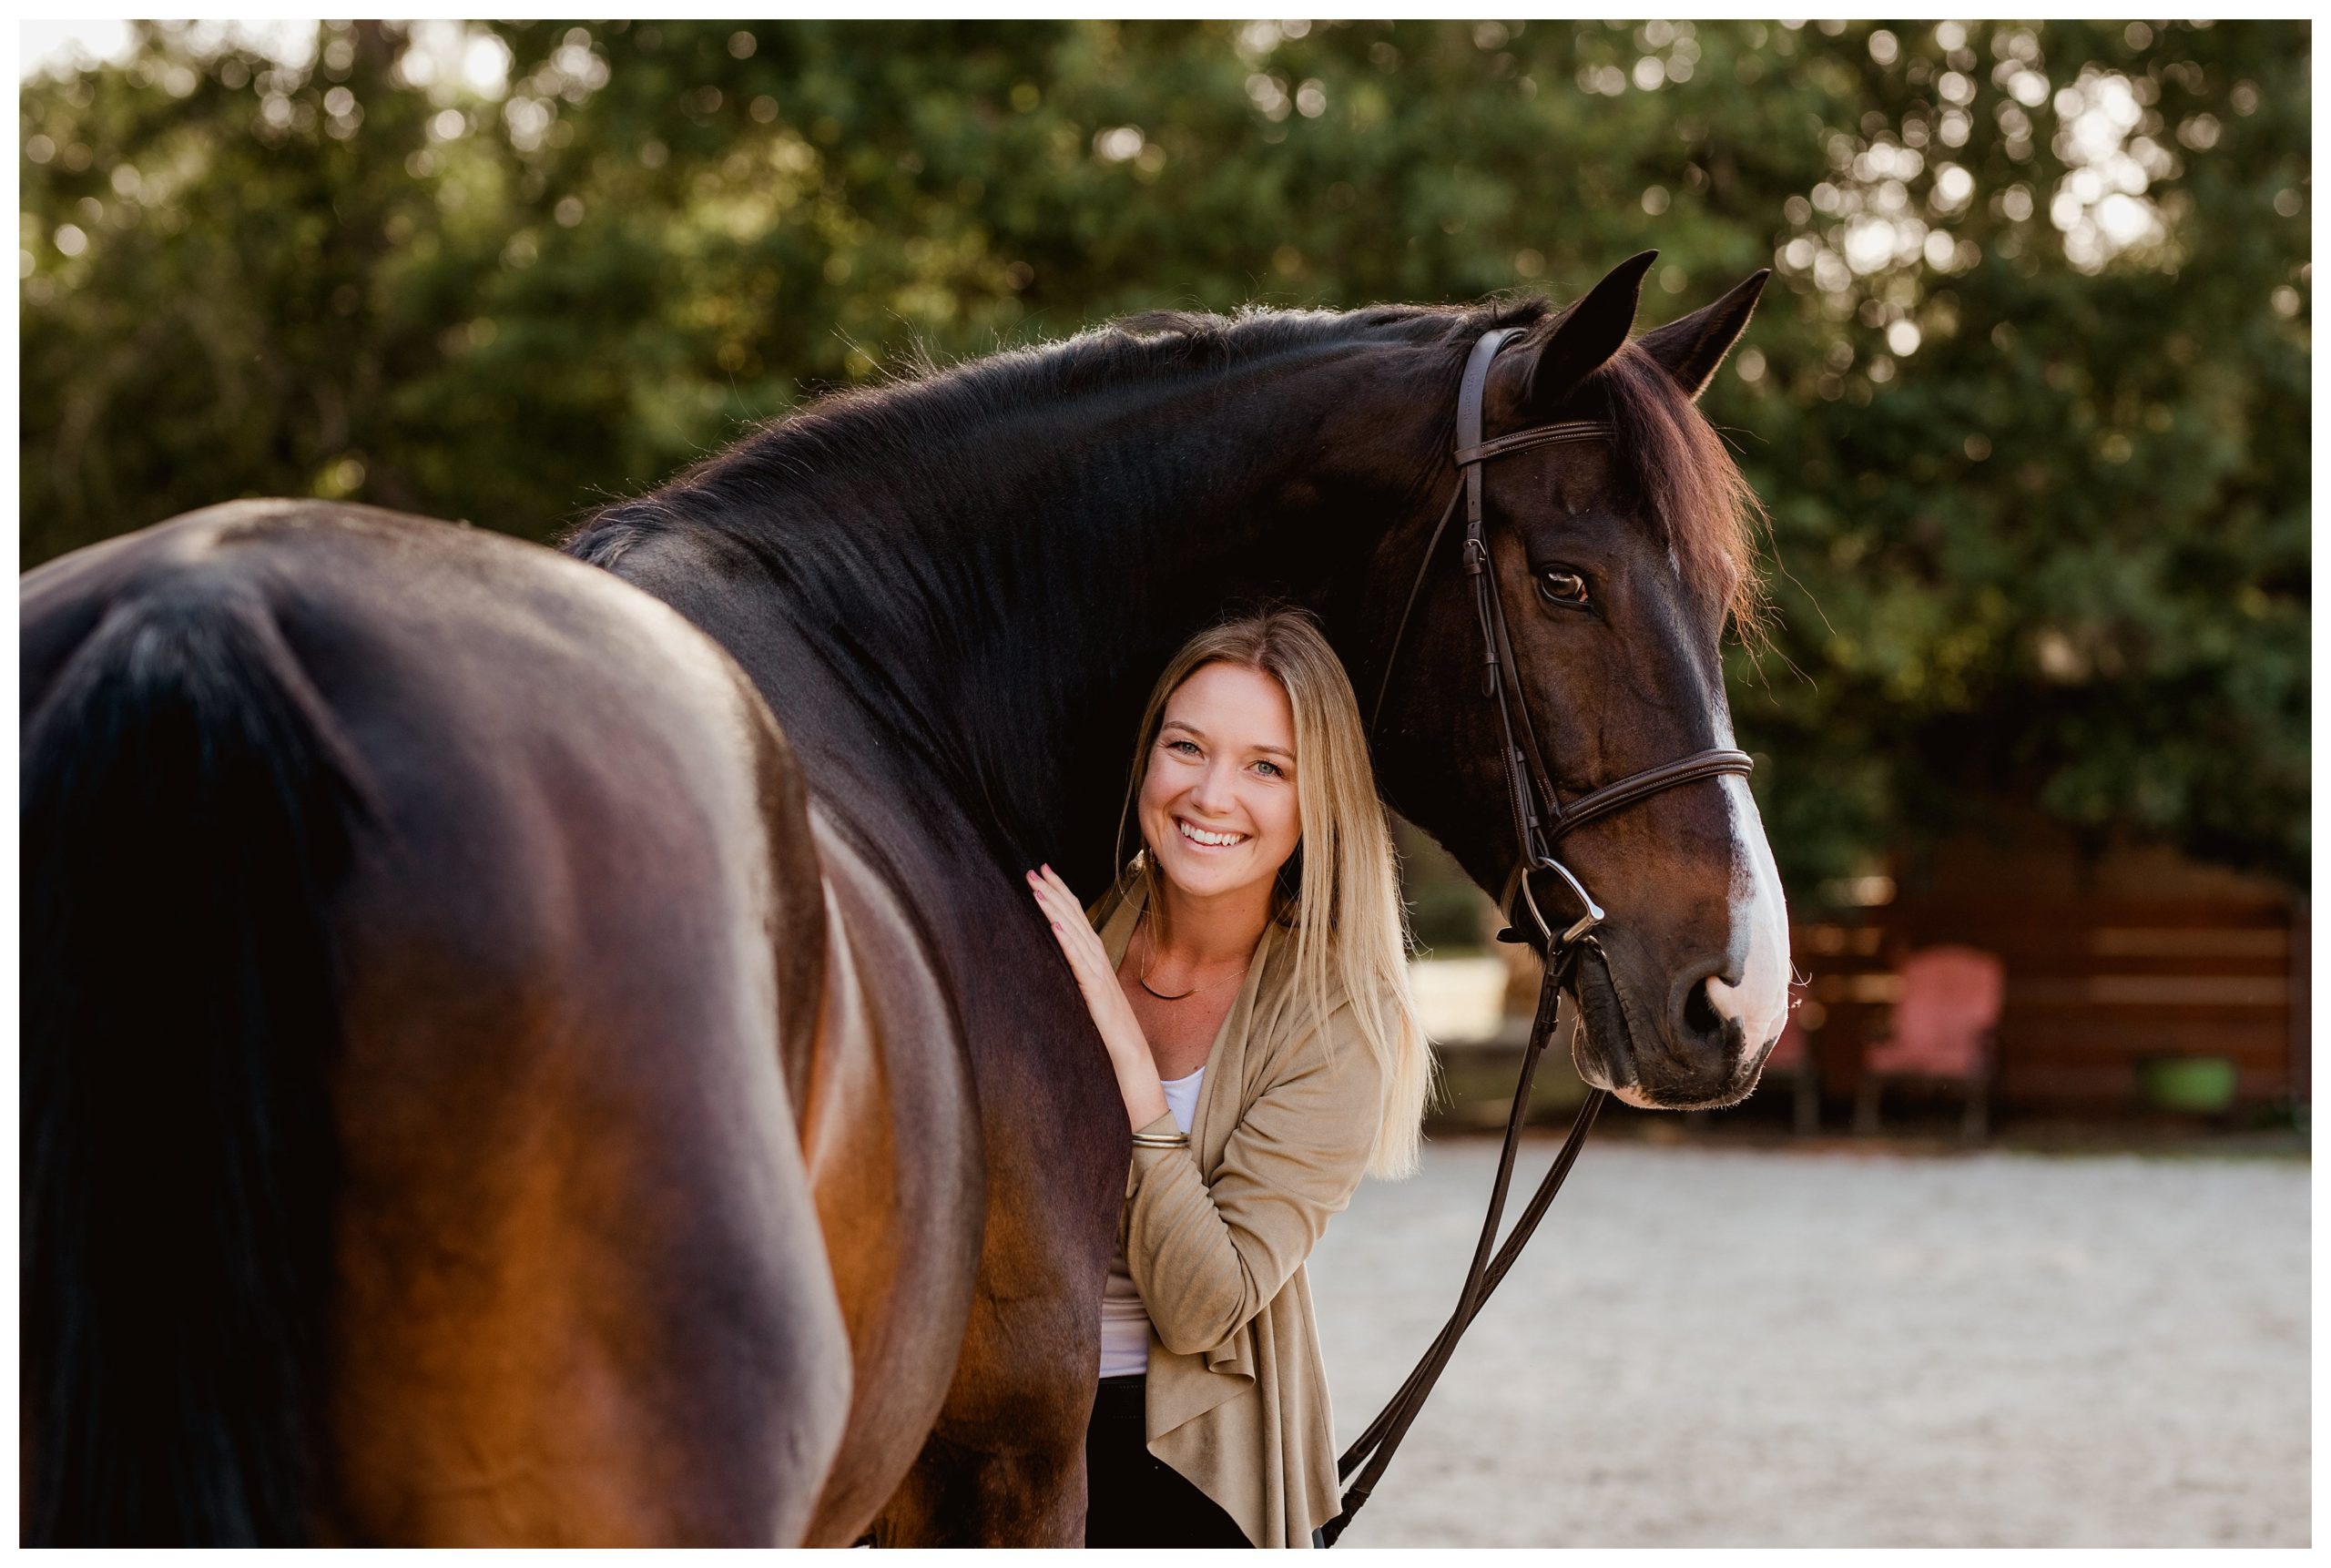 I loved capturing the horse and owner bond between Courtney and Churchill!